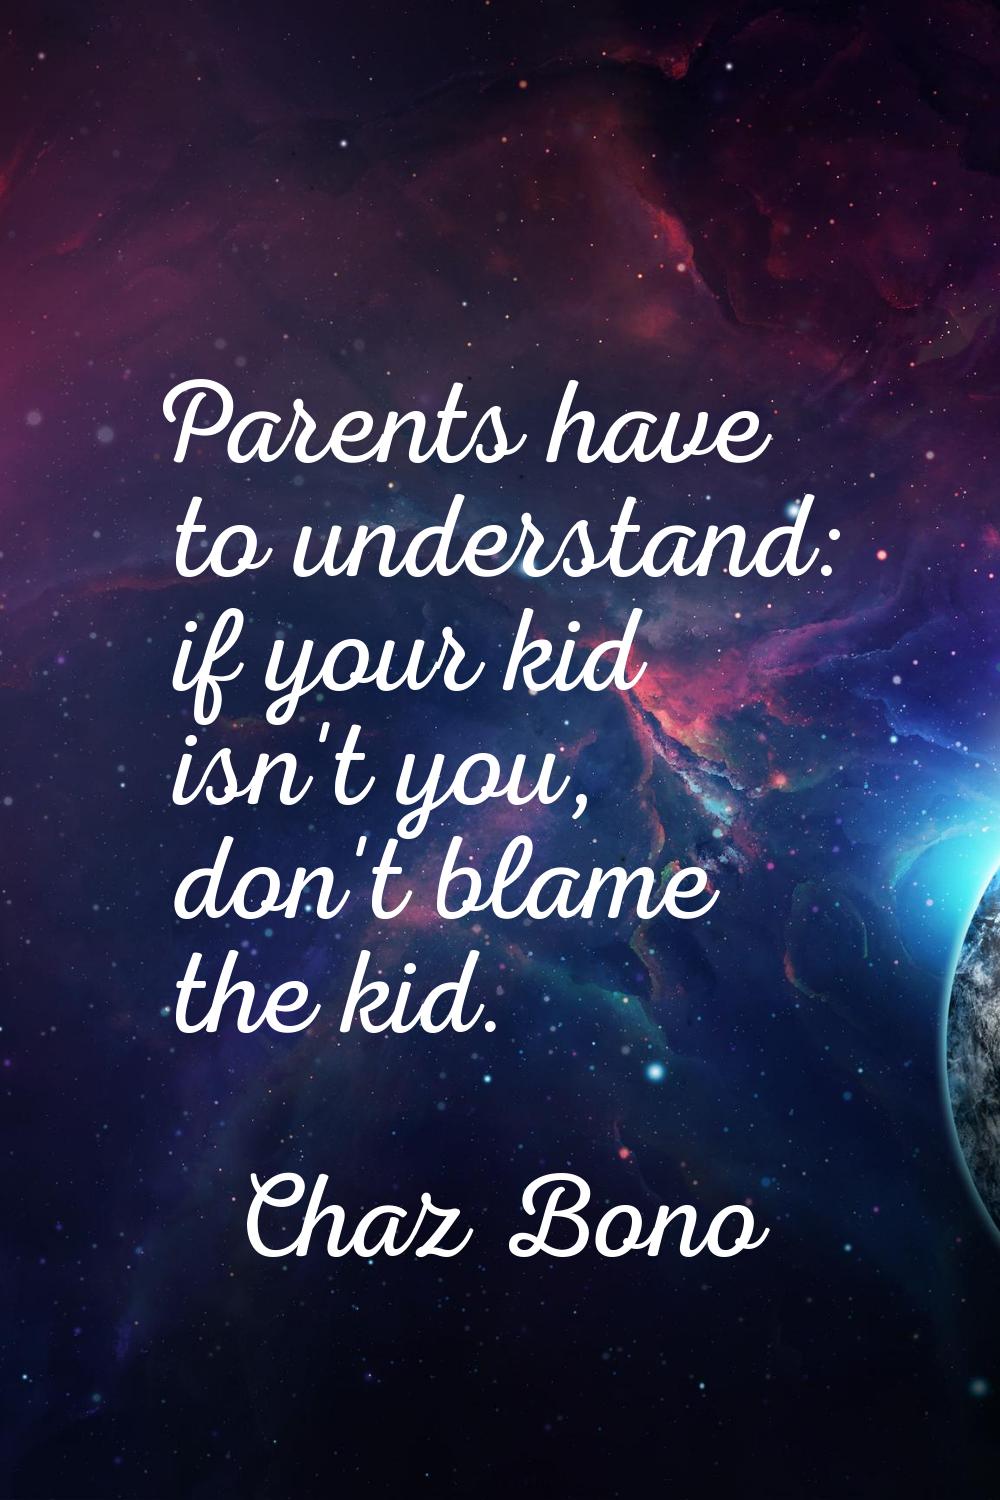 Parents have to understand: if your kid isn't you, don't blame the kid.